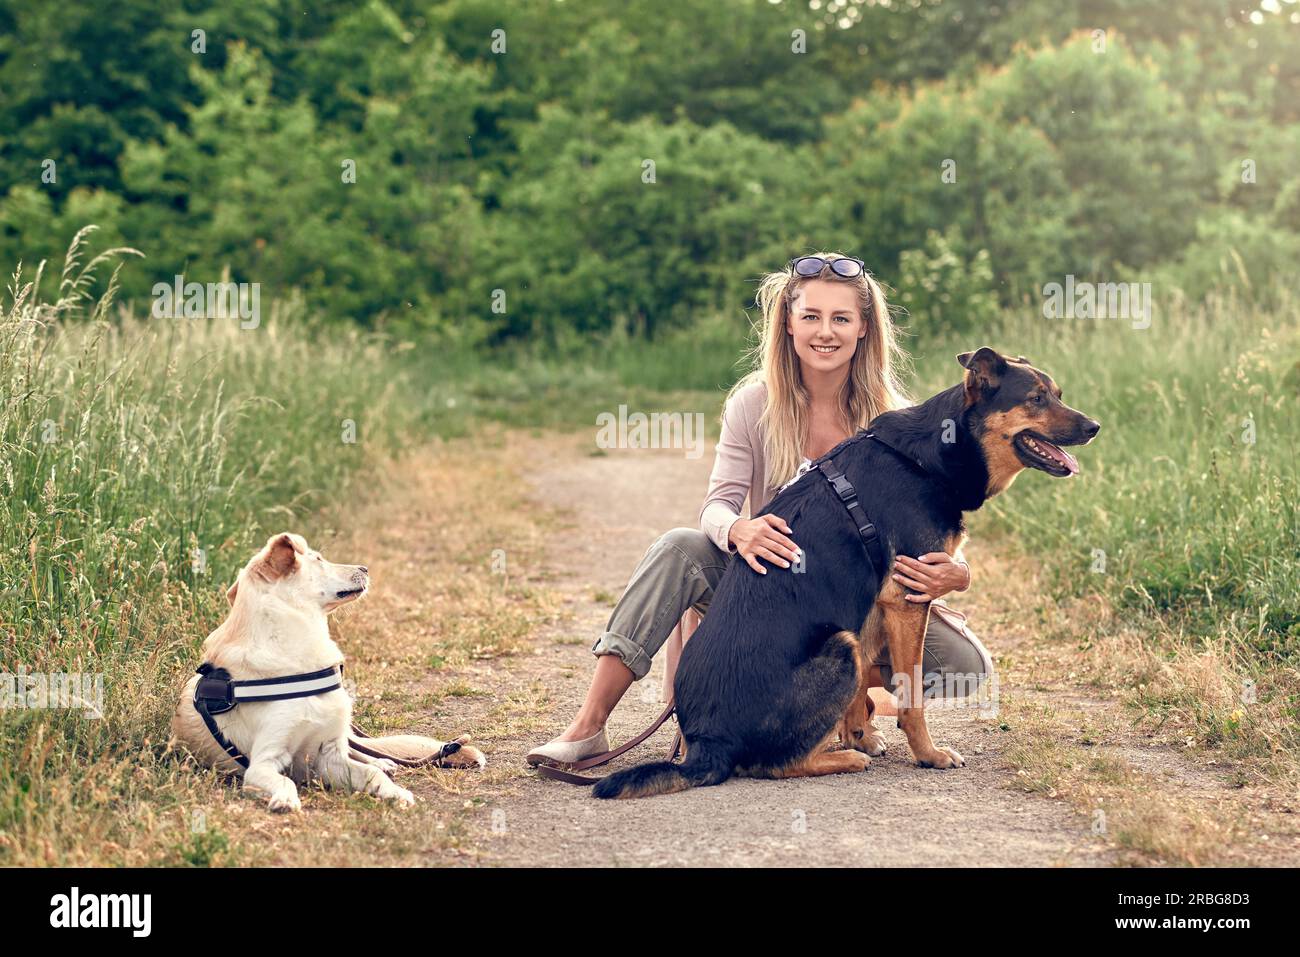 Happy blond woman with her two loyal dogs taking a rest on a rural farm road while exercising them kneeling down cuddling a large black and tan dog Stock Photo